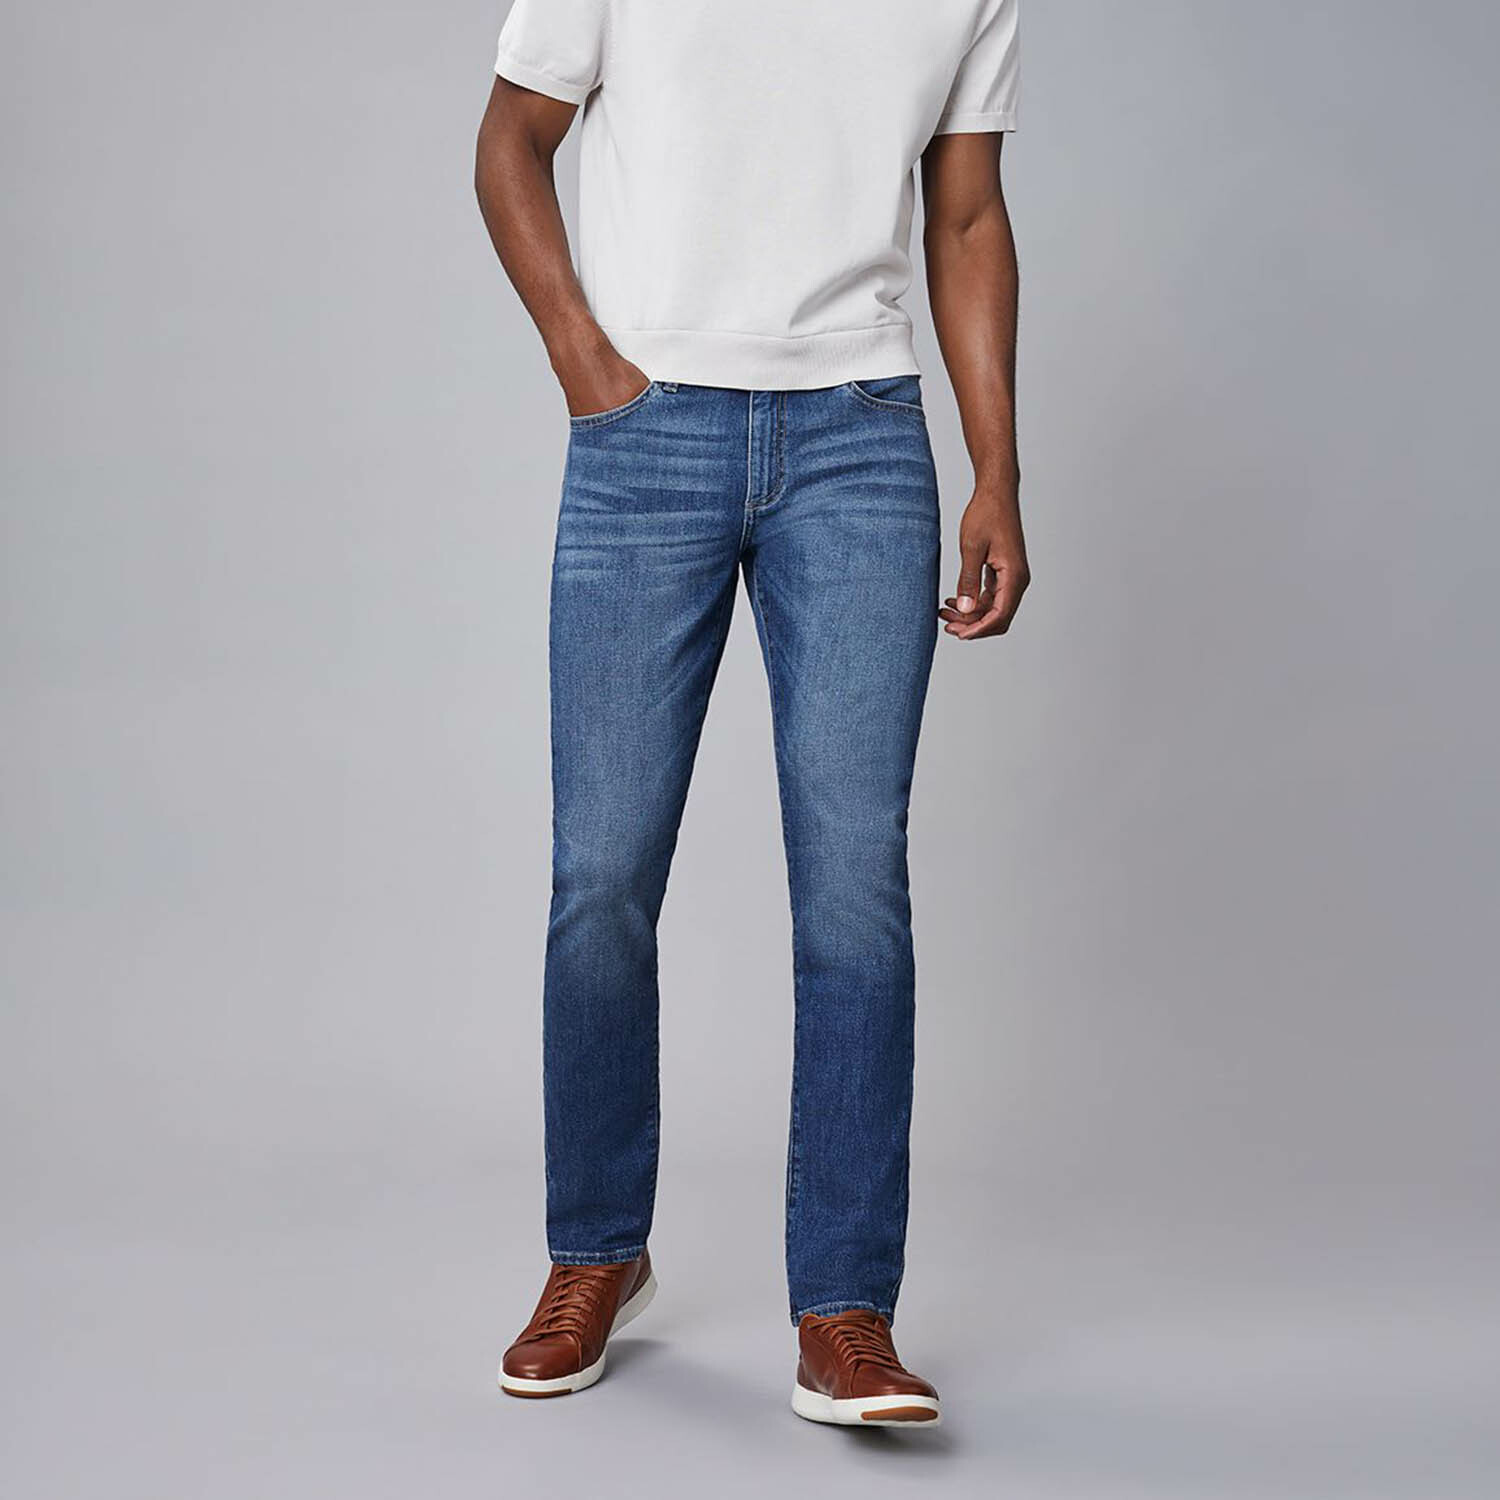 Cooper Slim Taper Jeans // Watermill (34WX32L) - DL1961 - Touch of Modern